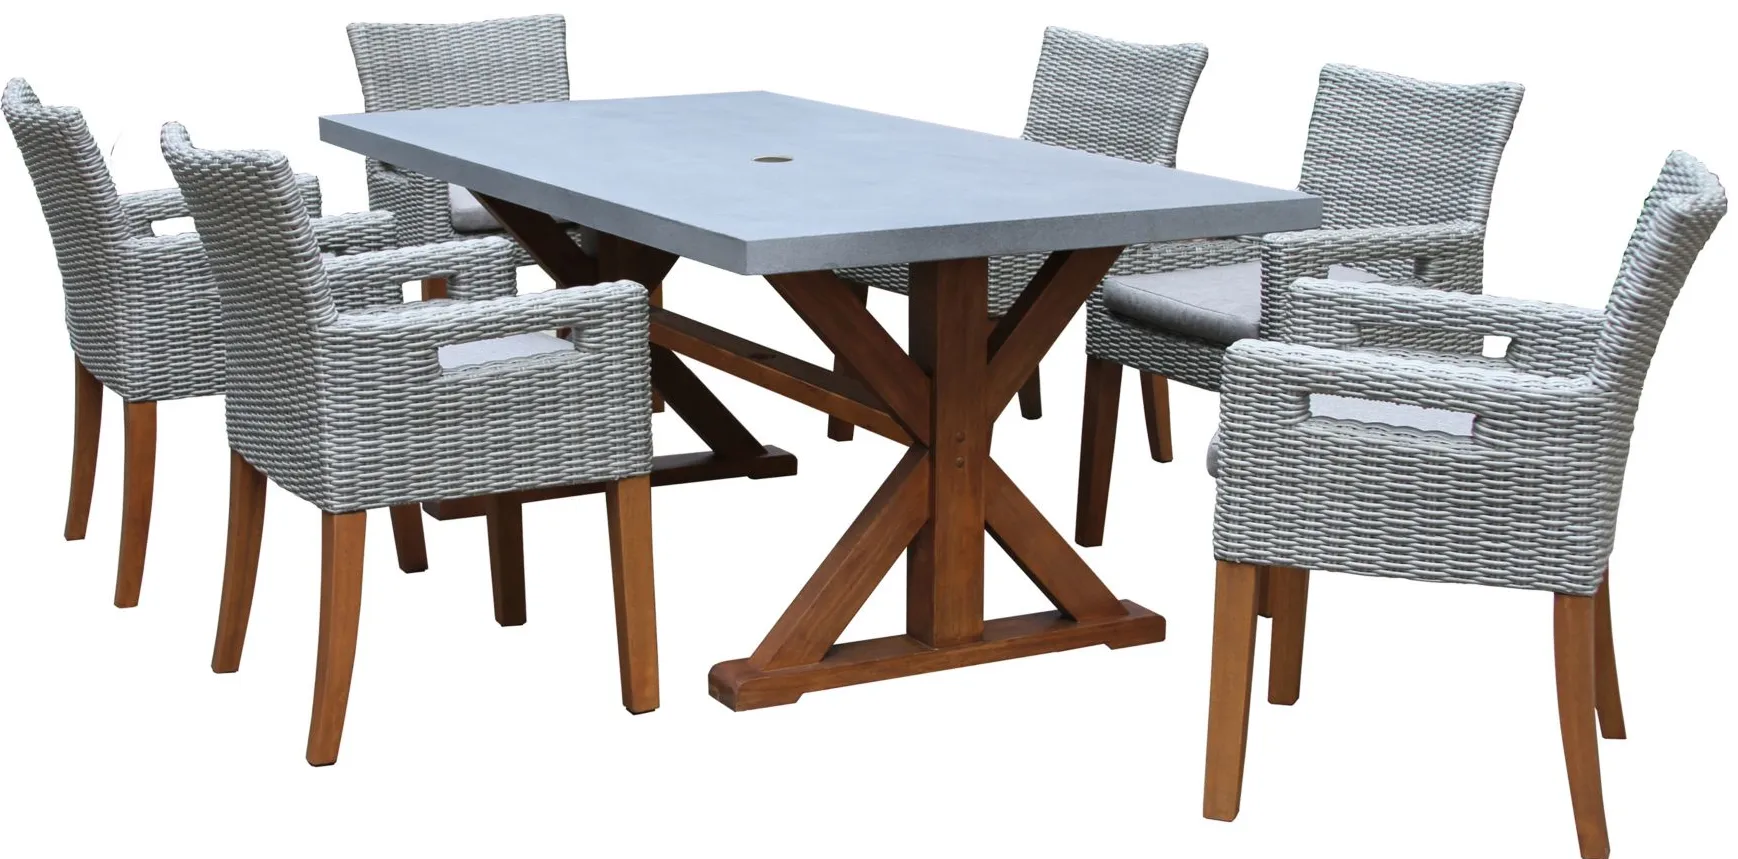 Nautical 7-pc. Composite and Concrete Outdoor Dining Set in Faye Ash by Outdoor Interiors